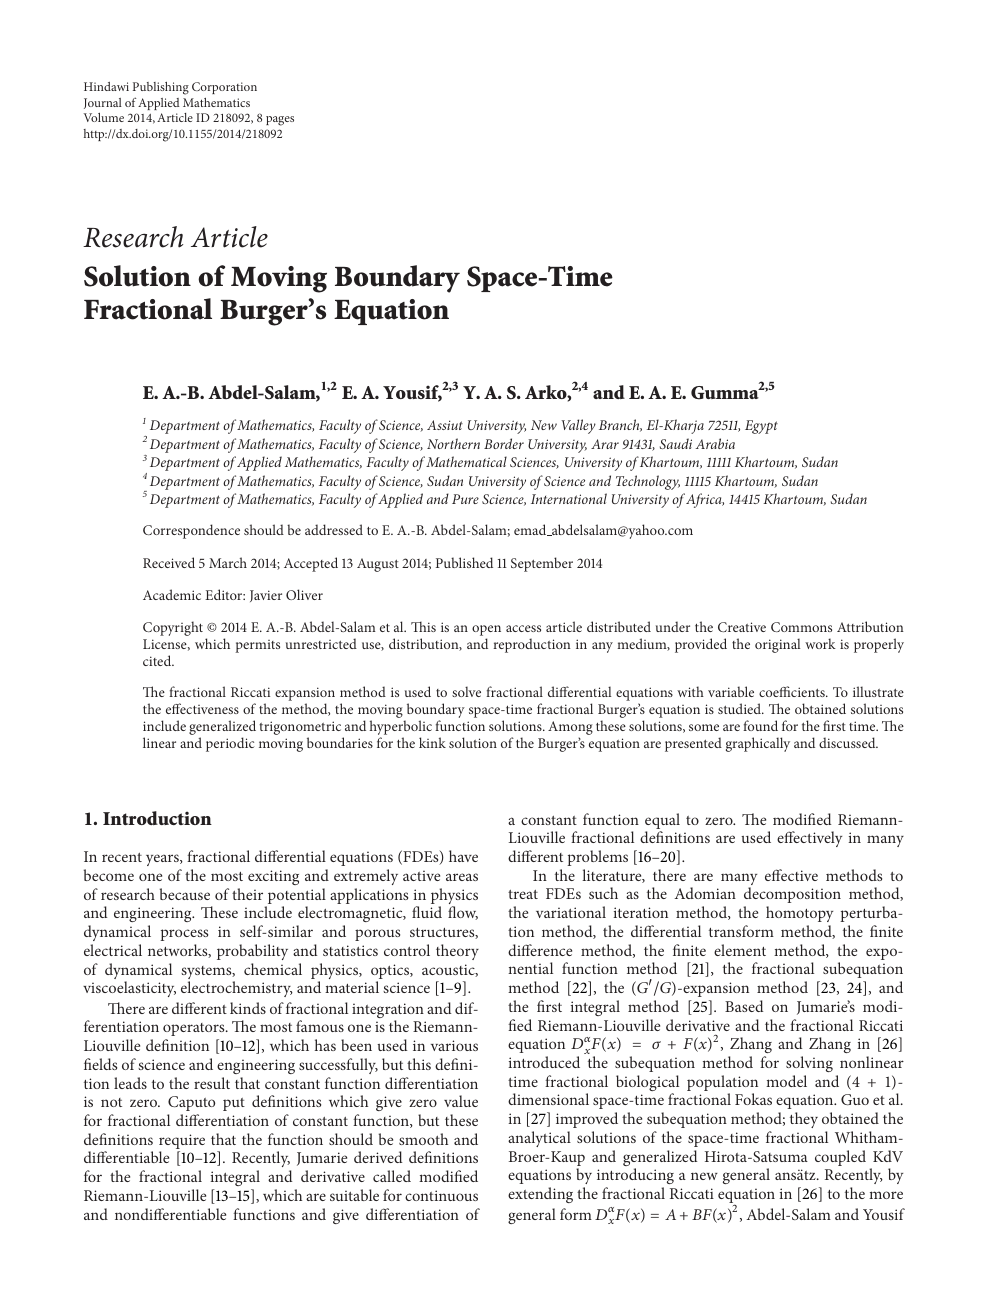 Solution Of Moving Boundary Space Time Fractional Burger S Equation Topic Of Research Paper In Mathematics Download Scholarly Article Pdf And Read For Free On Cyberleninka Open Science Hub